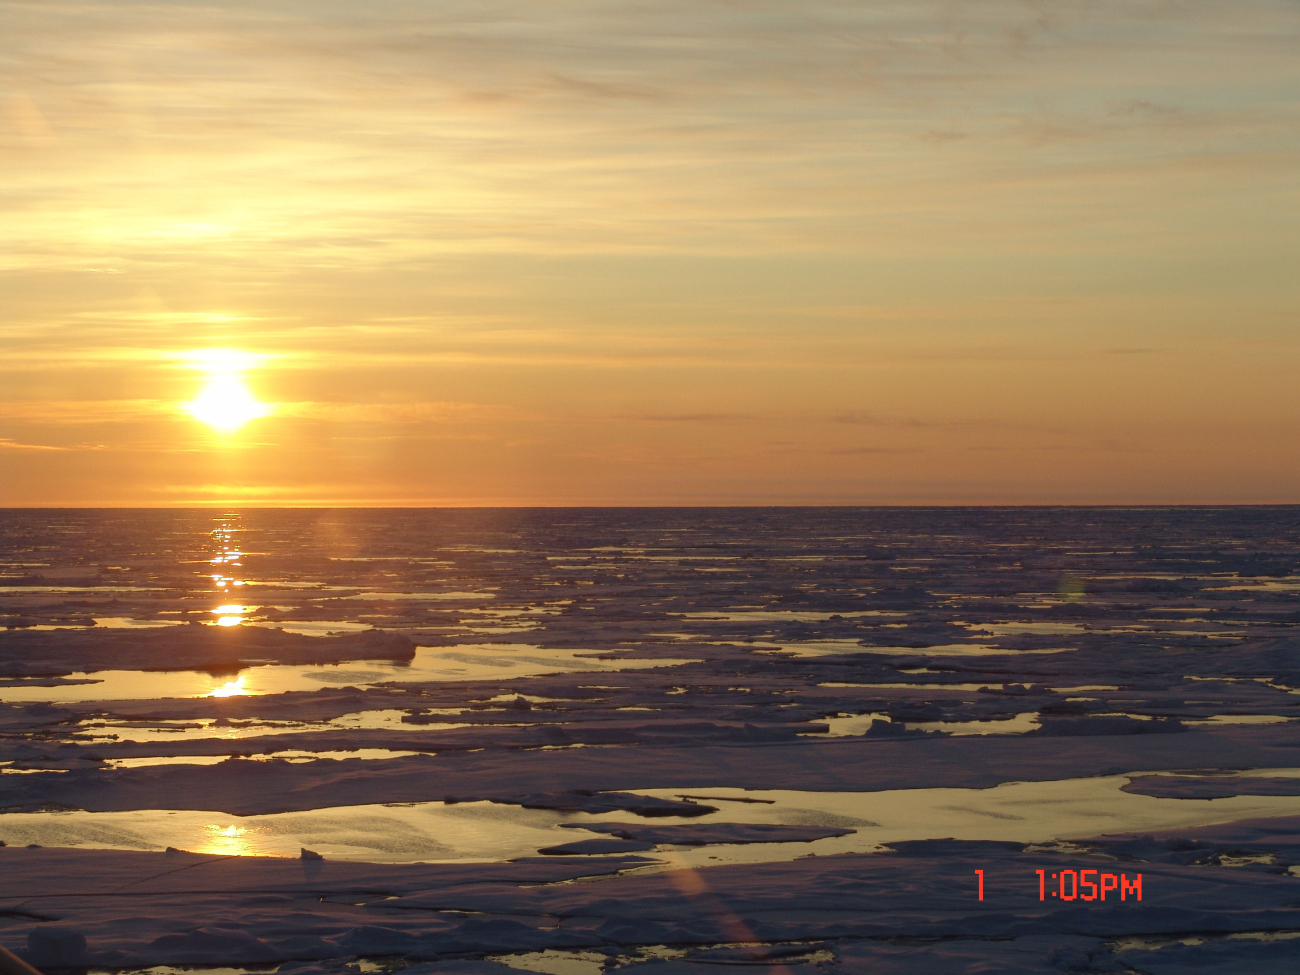 Ice floes, melt ponds and a golden sun